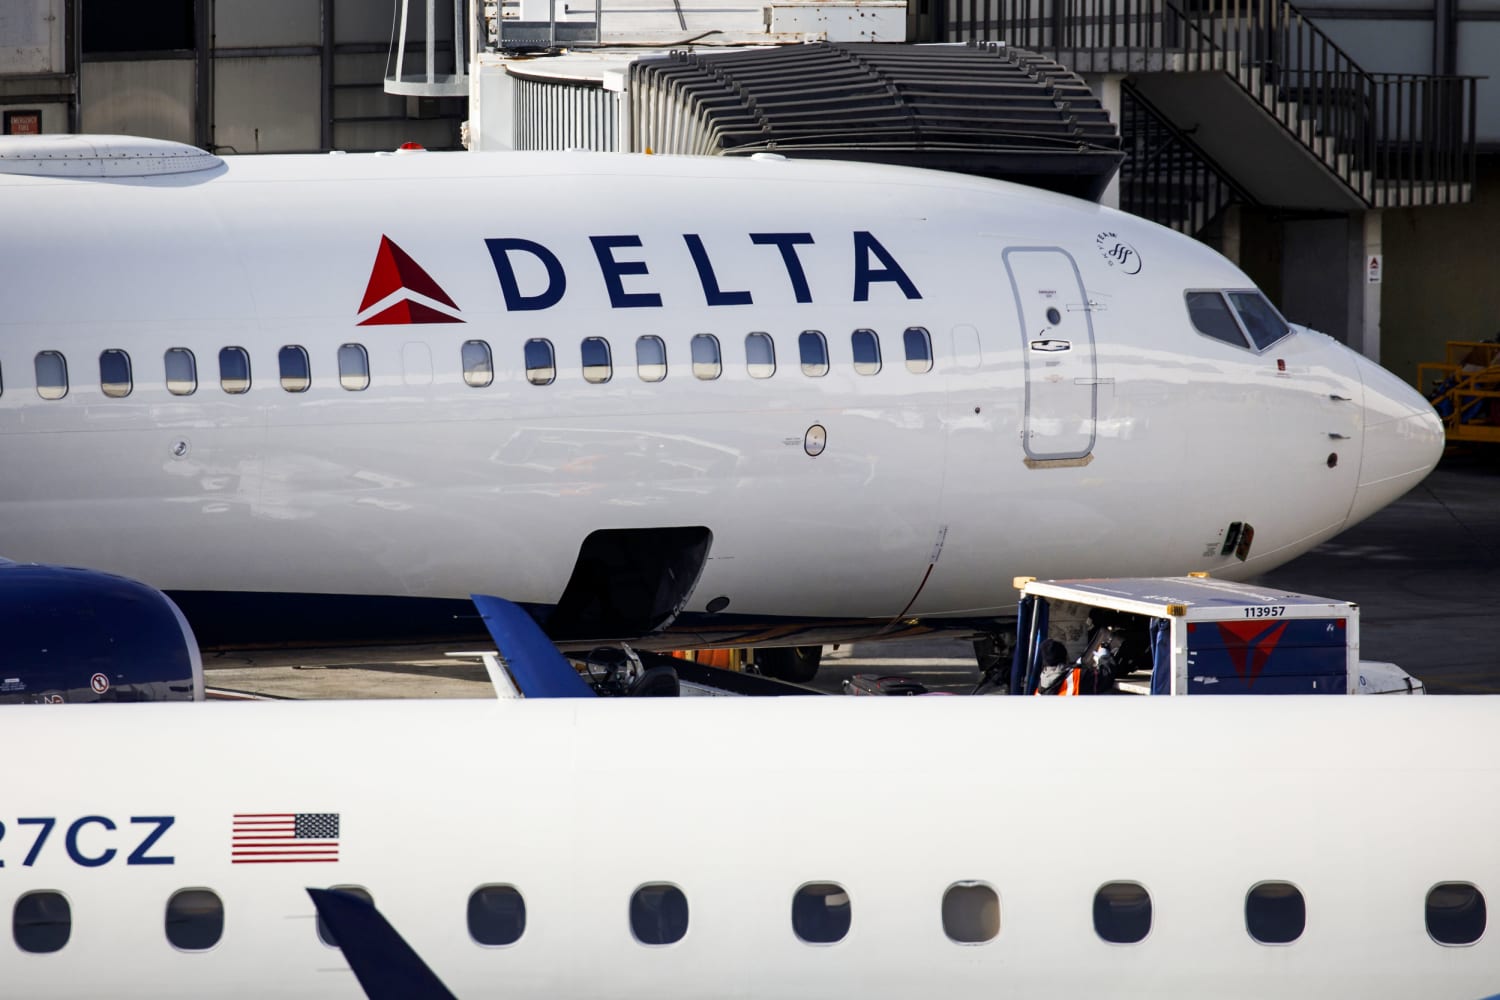 Man detained at LAX and acused of opening emergency exit on Delta plane